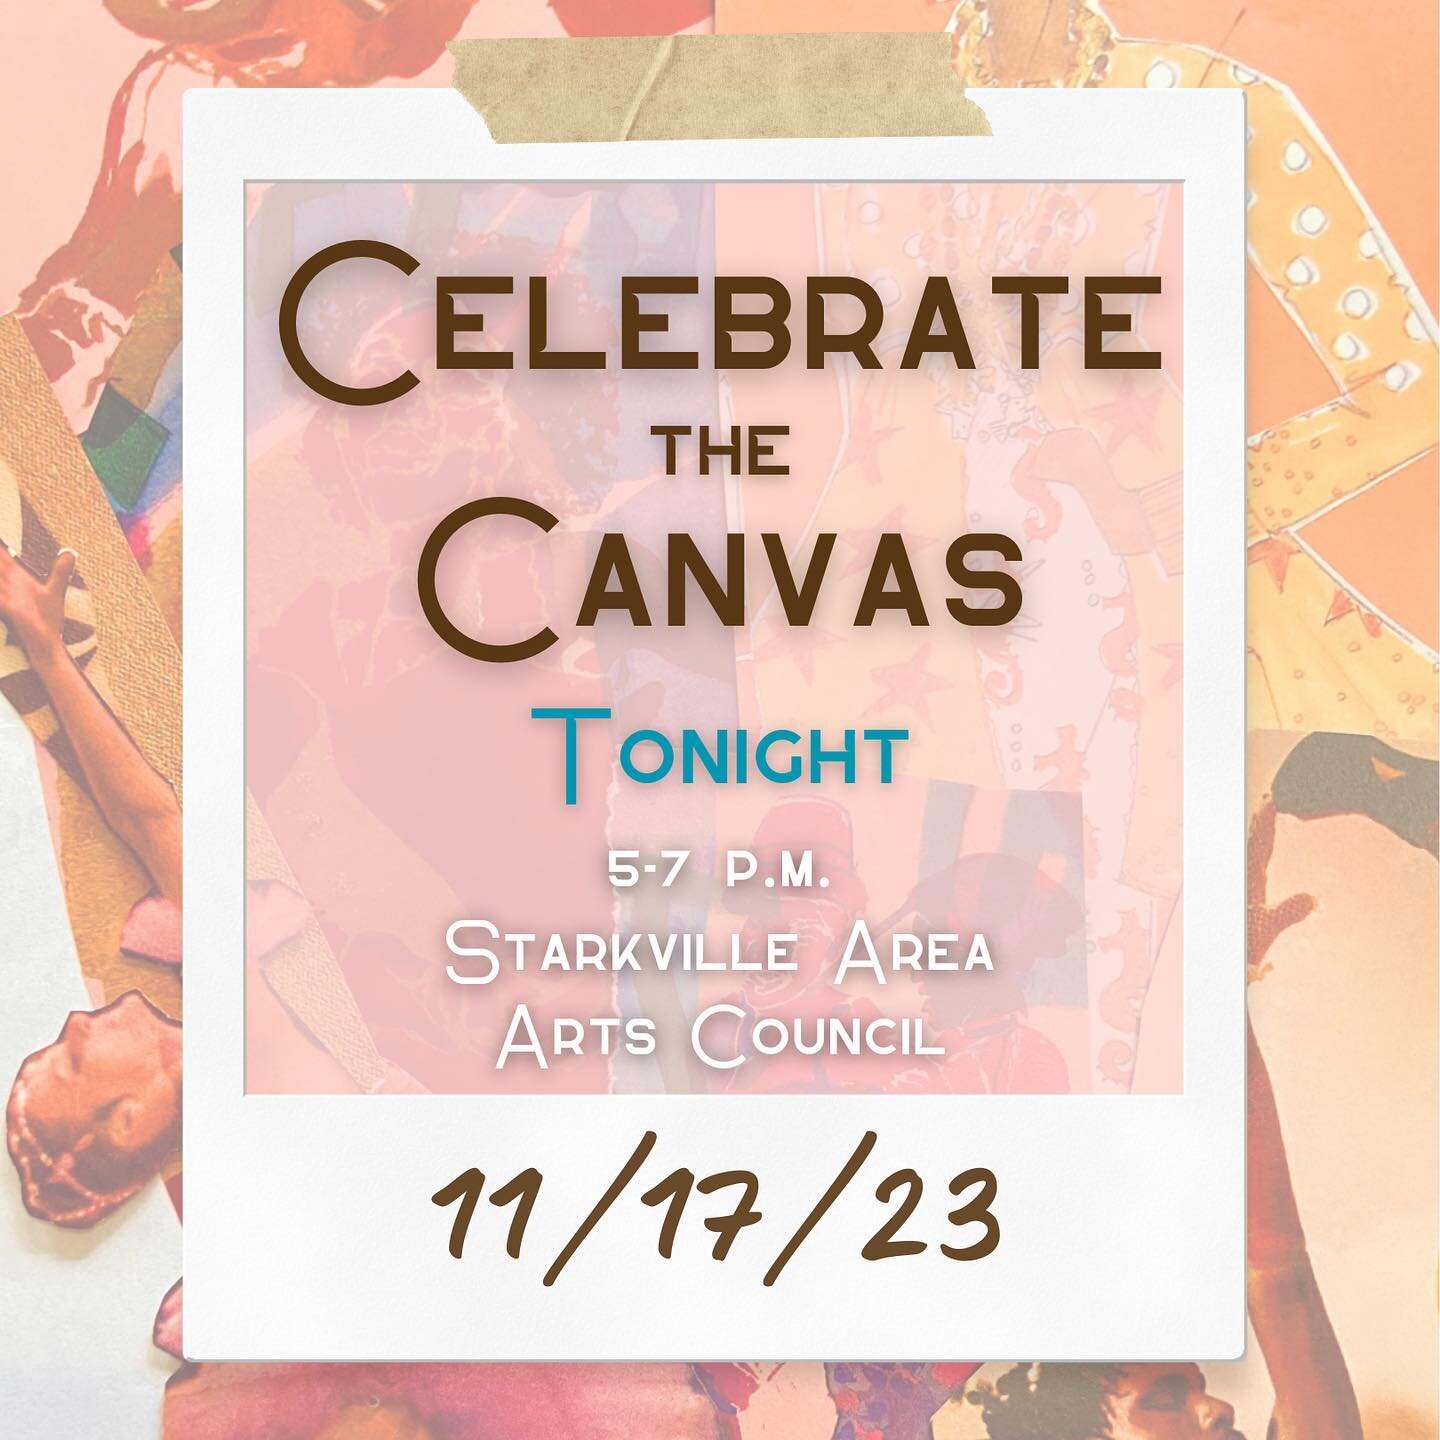 Celebrate the Canvas is just a couple of hours away! We will have copies of the Celebrate the Canvas zine, live body painting, journaling and creative arts supplies, and an open mic! We hope to see you there!